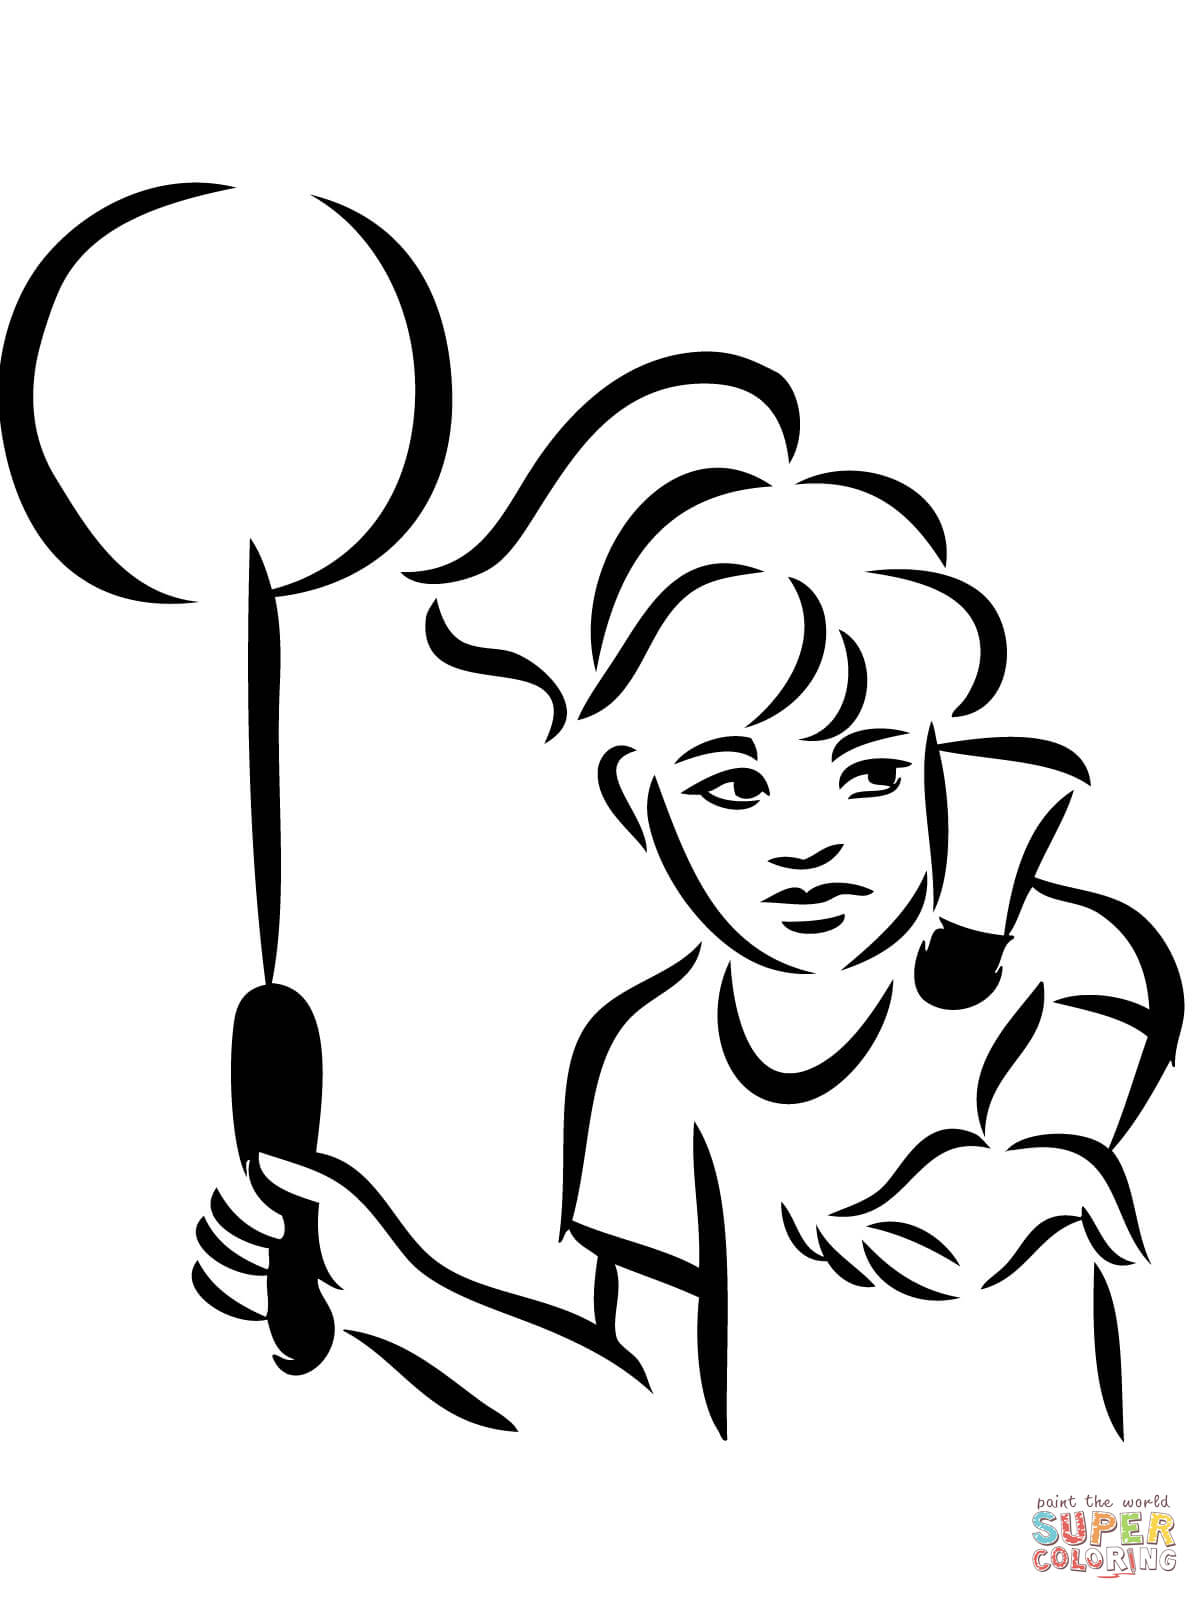 Badminton clipart colouring page. Serve coloring free printable